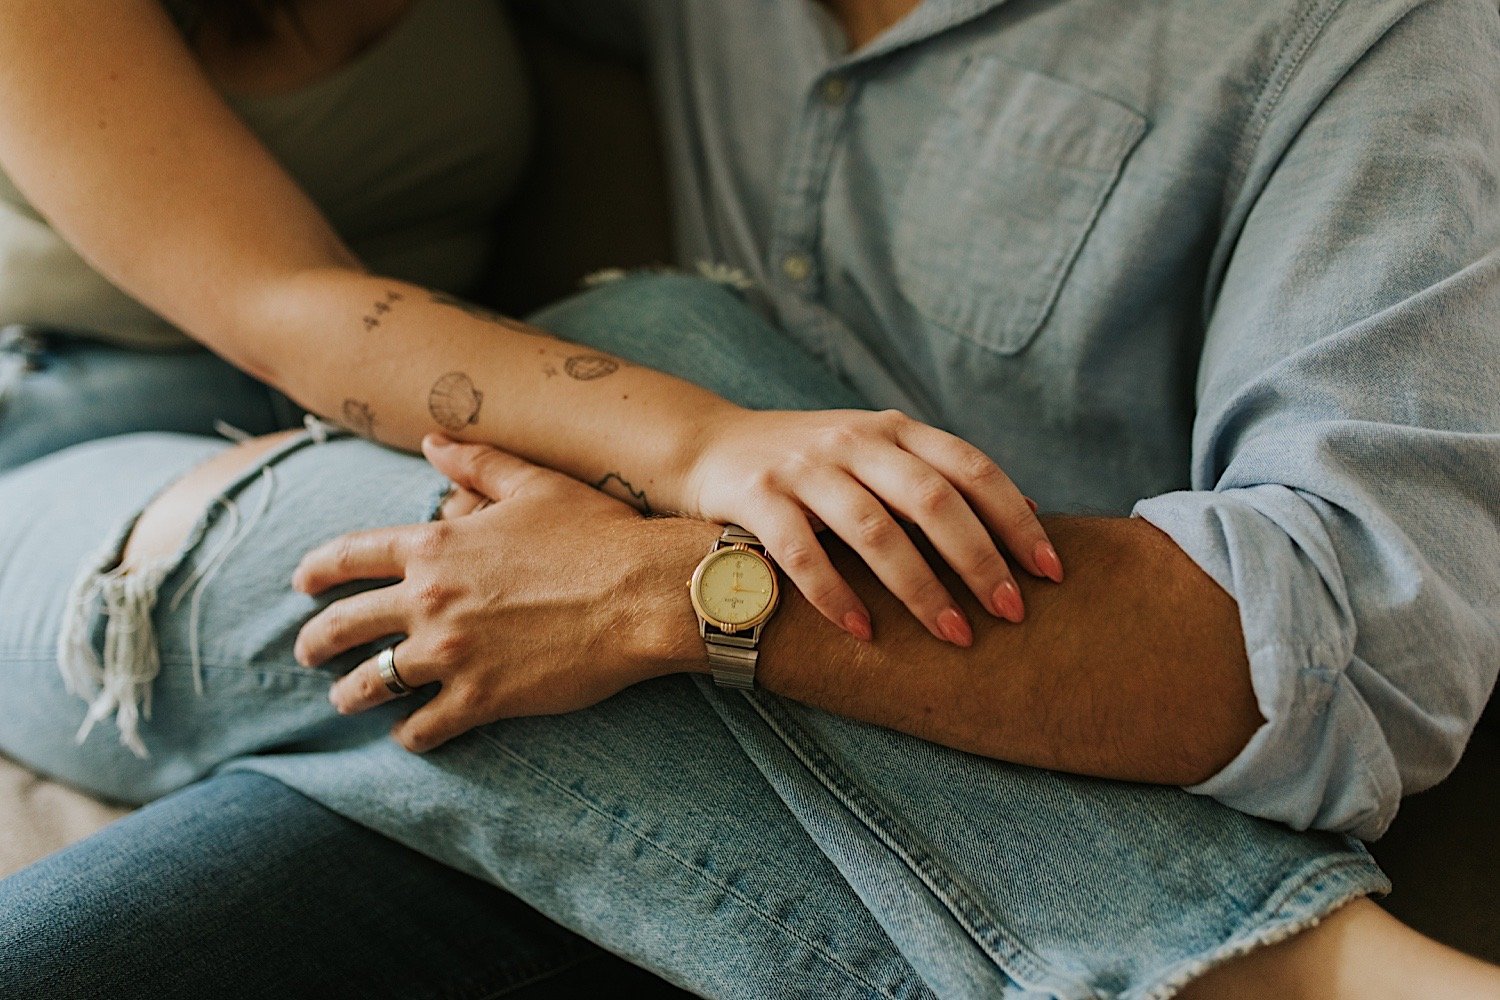 A close up of a woman's hand holding her husbands arm.  They are sitting on the couch with their legs overlapping.  The husband has a gold watch on with a silver strap and a silver wedding band.  The wife has a shell tattoo on her arm.